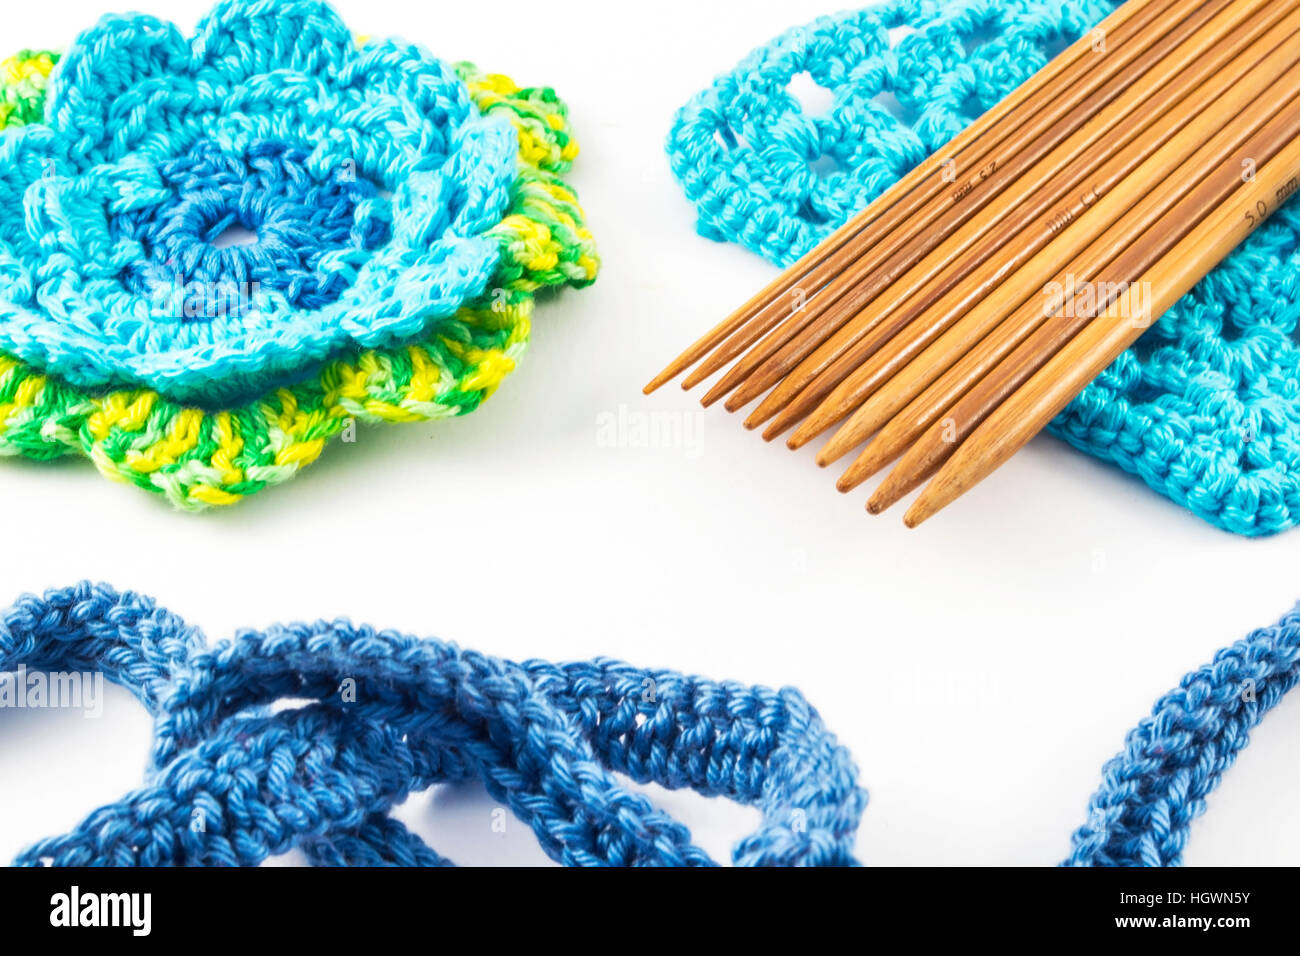 Crochet hooks and wool on white background Stock Photo